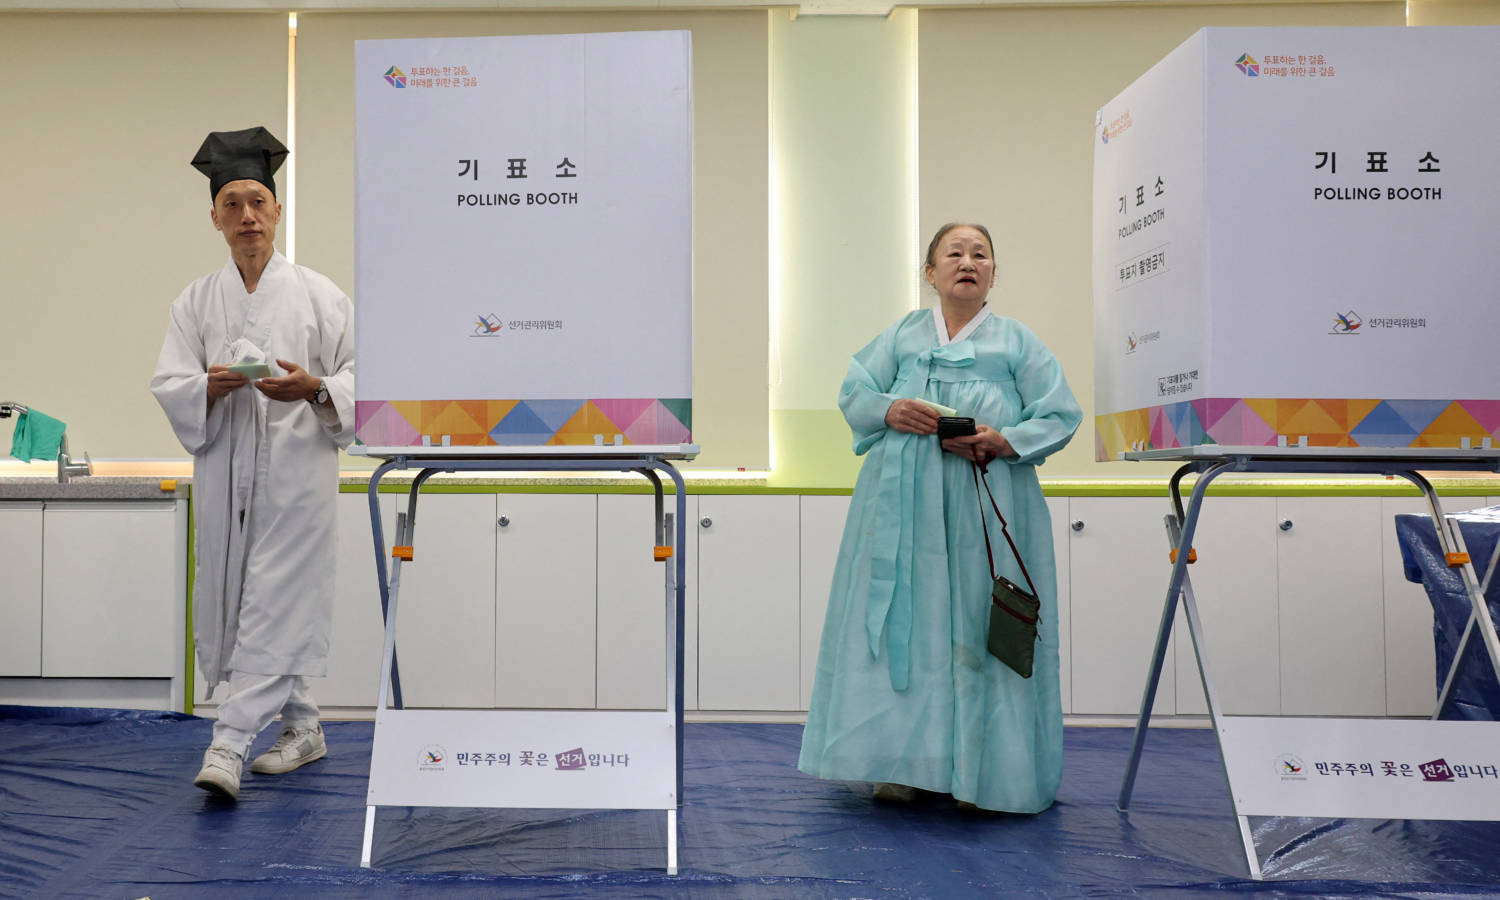 22nd Parliamentary Election In Seoul